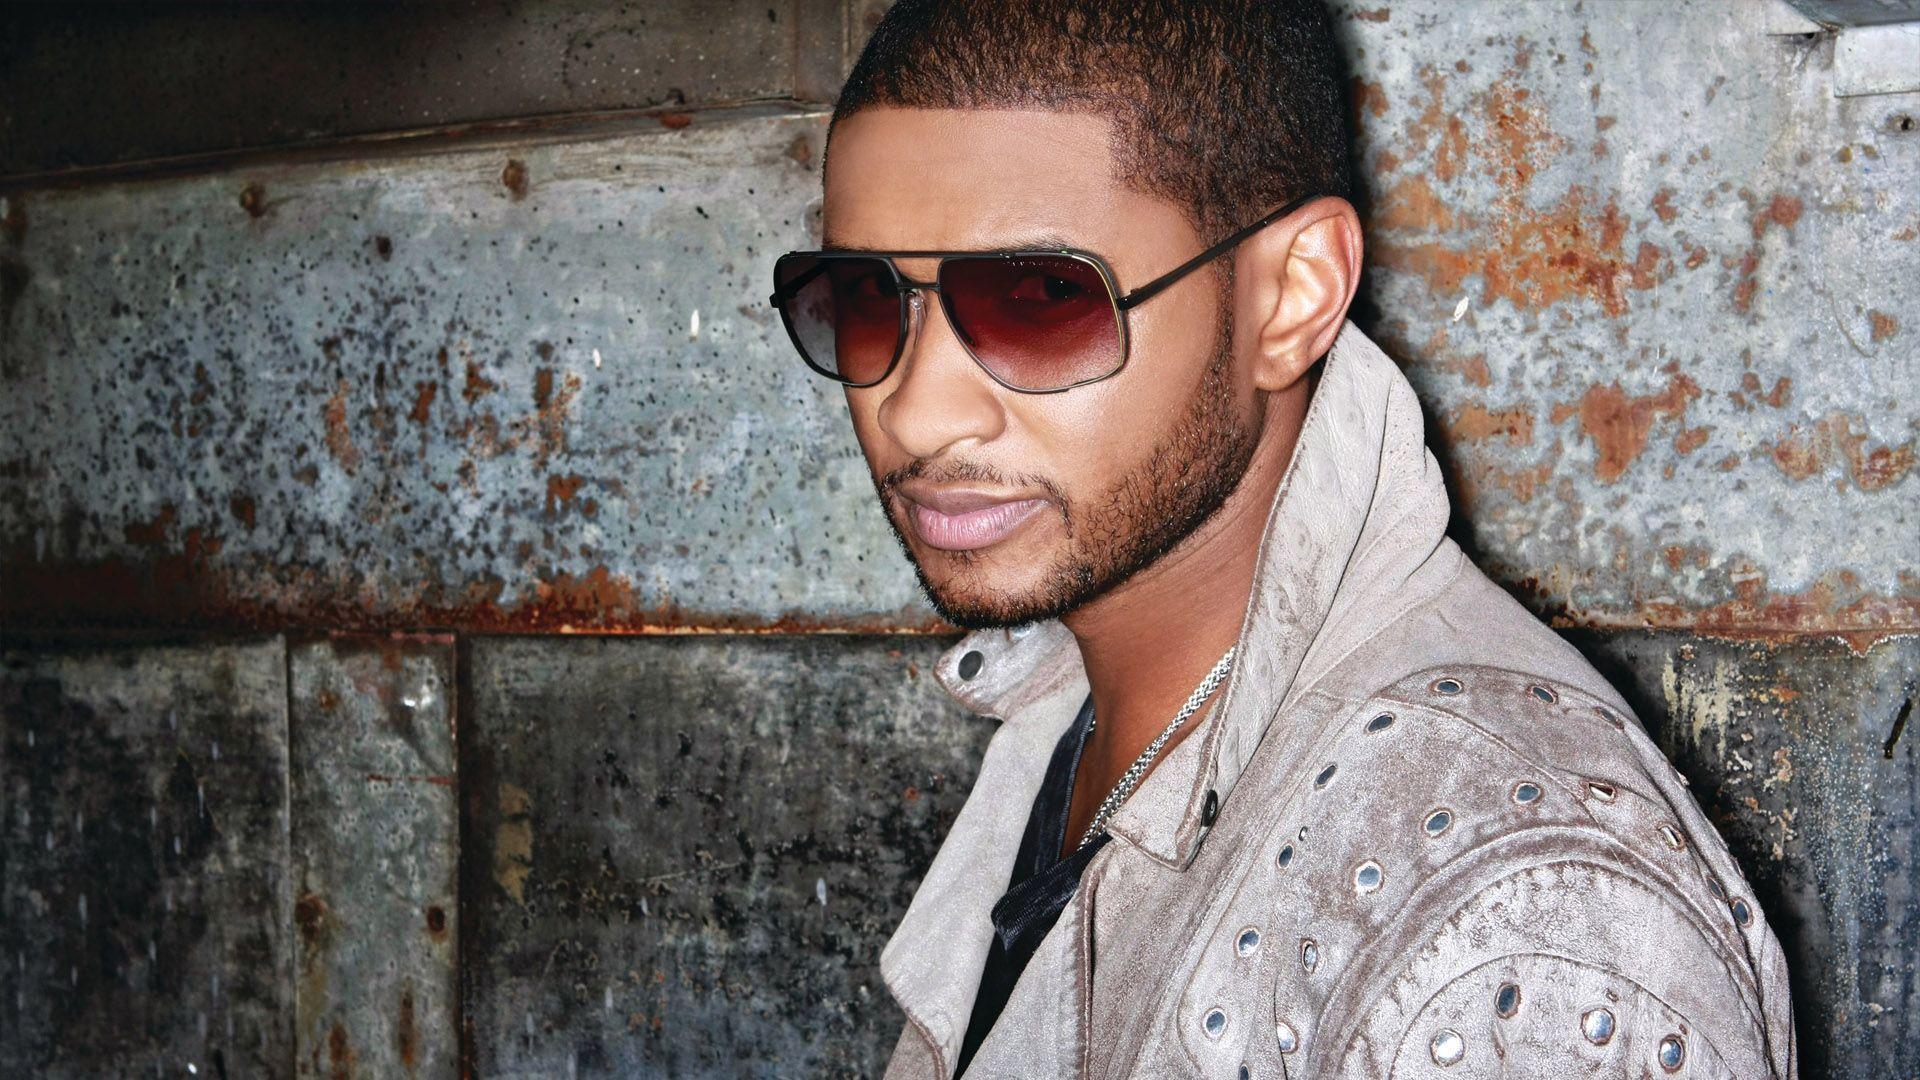 Usher Wallpaper 2020 APK for Android Download